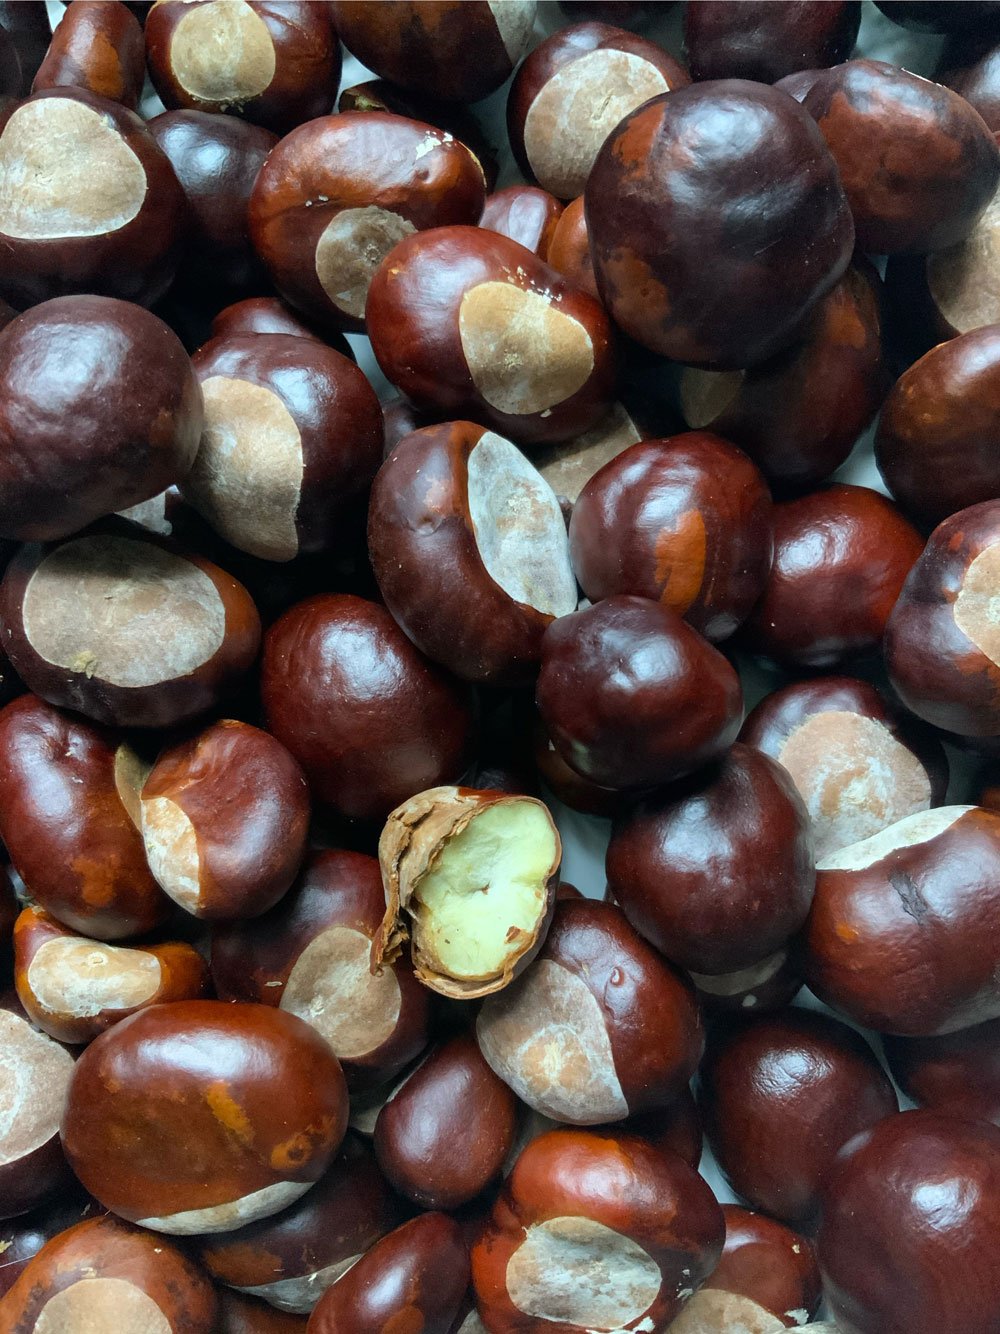 Conkers (Horse Chestnuts) - not edible!